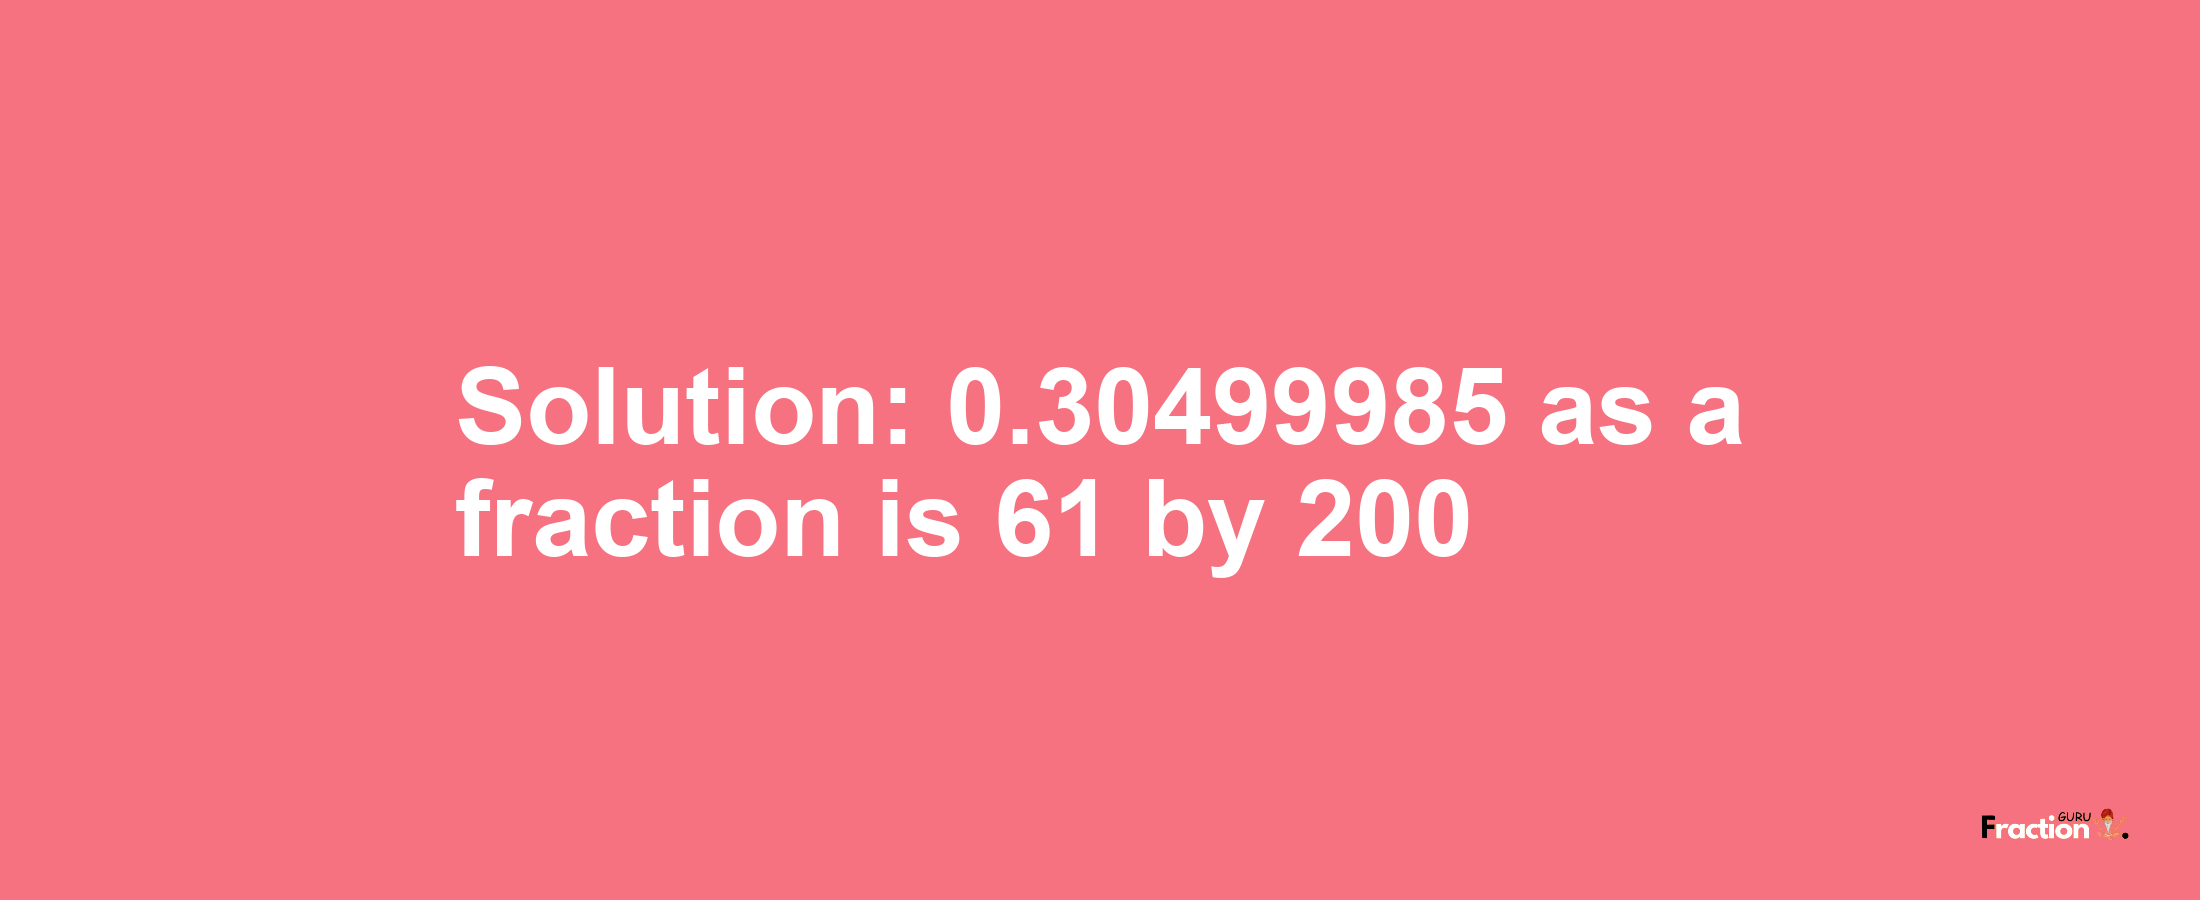 Solution:0.30499985 as a fraction is 61/200